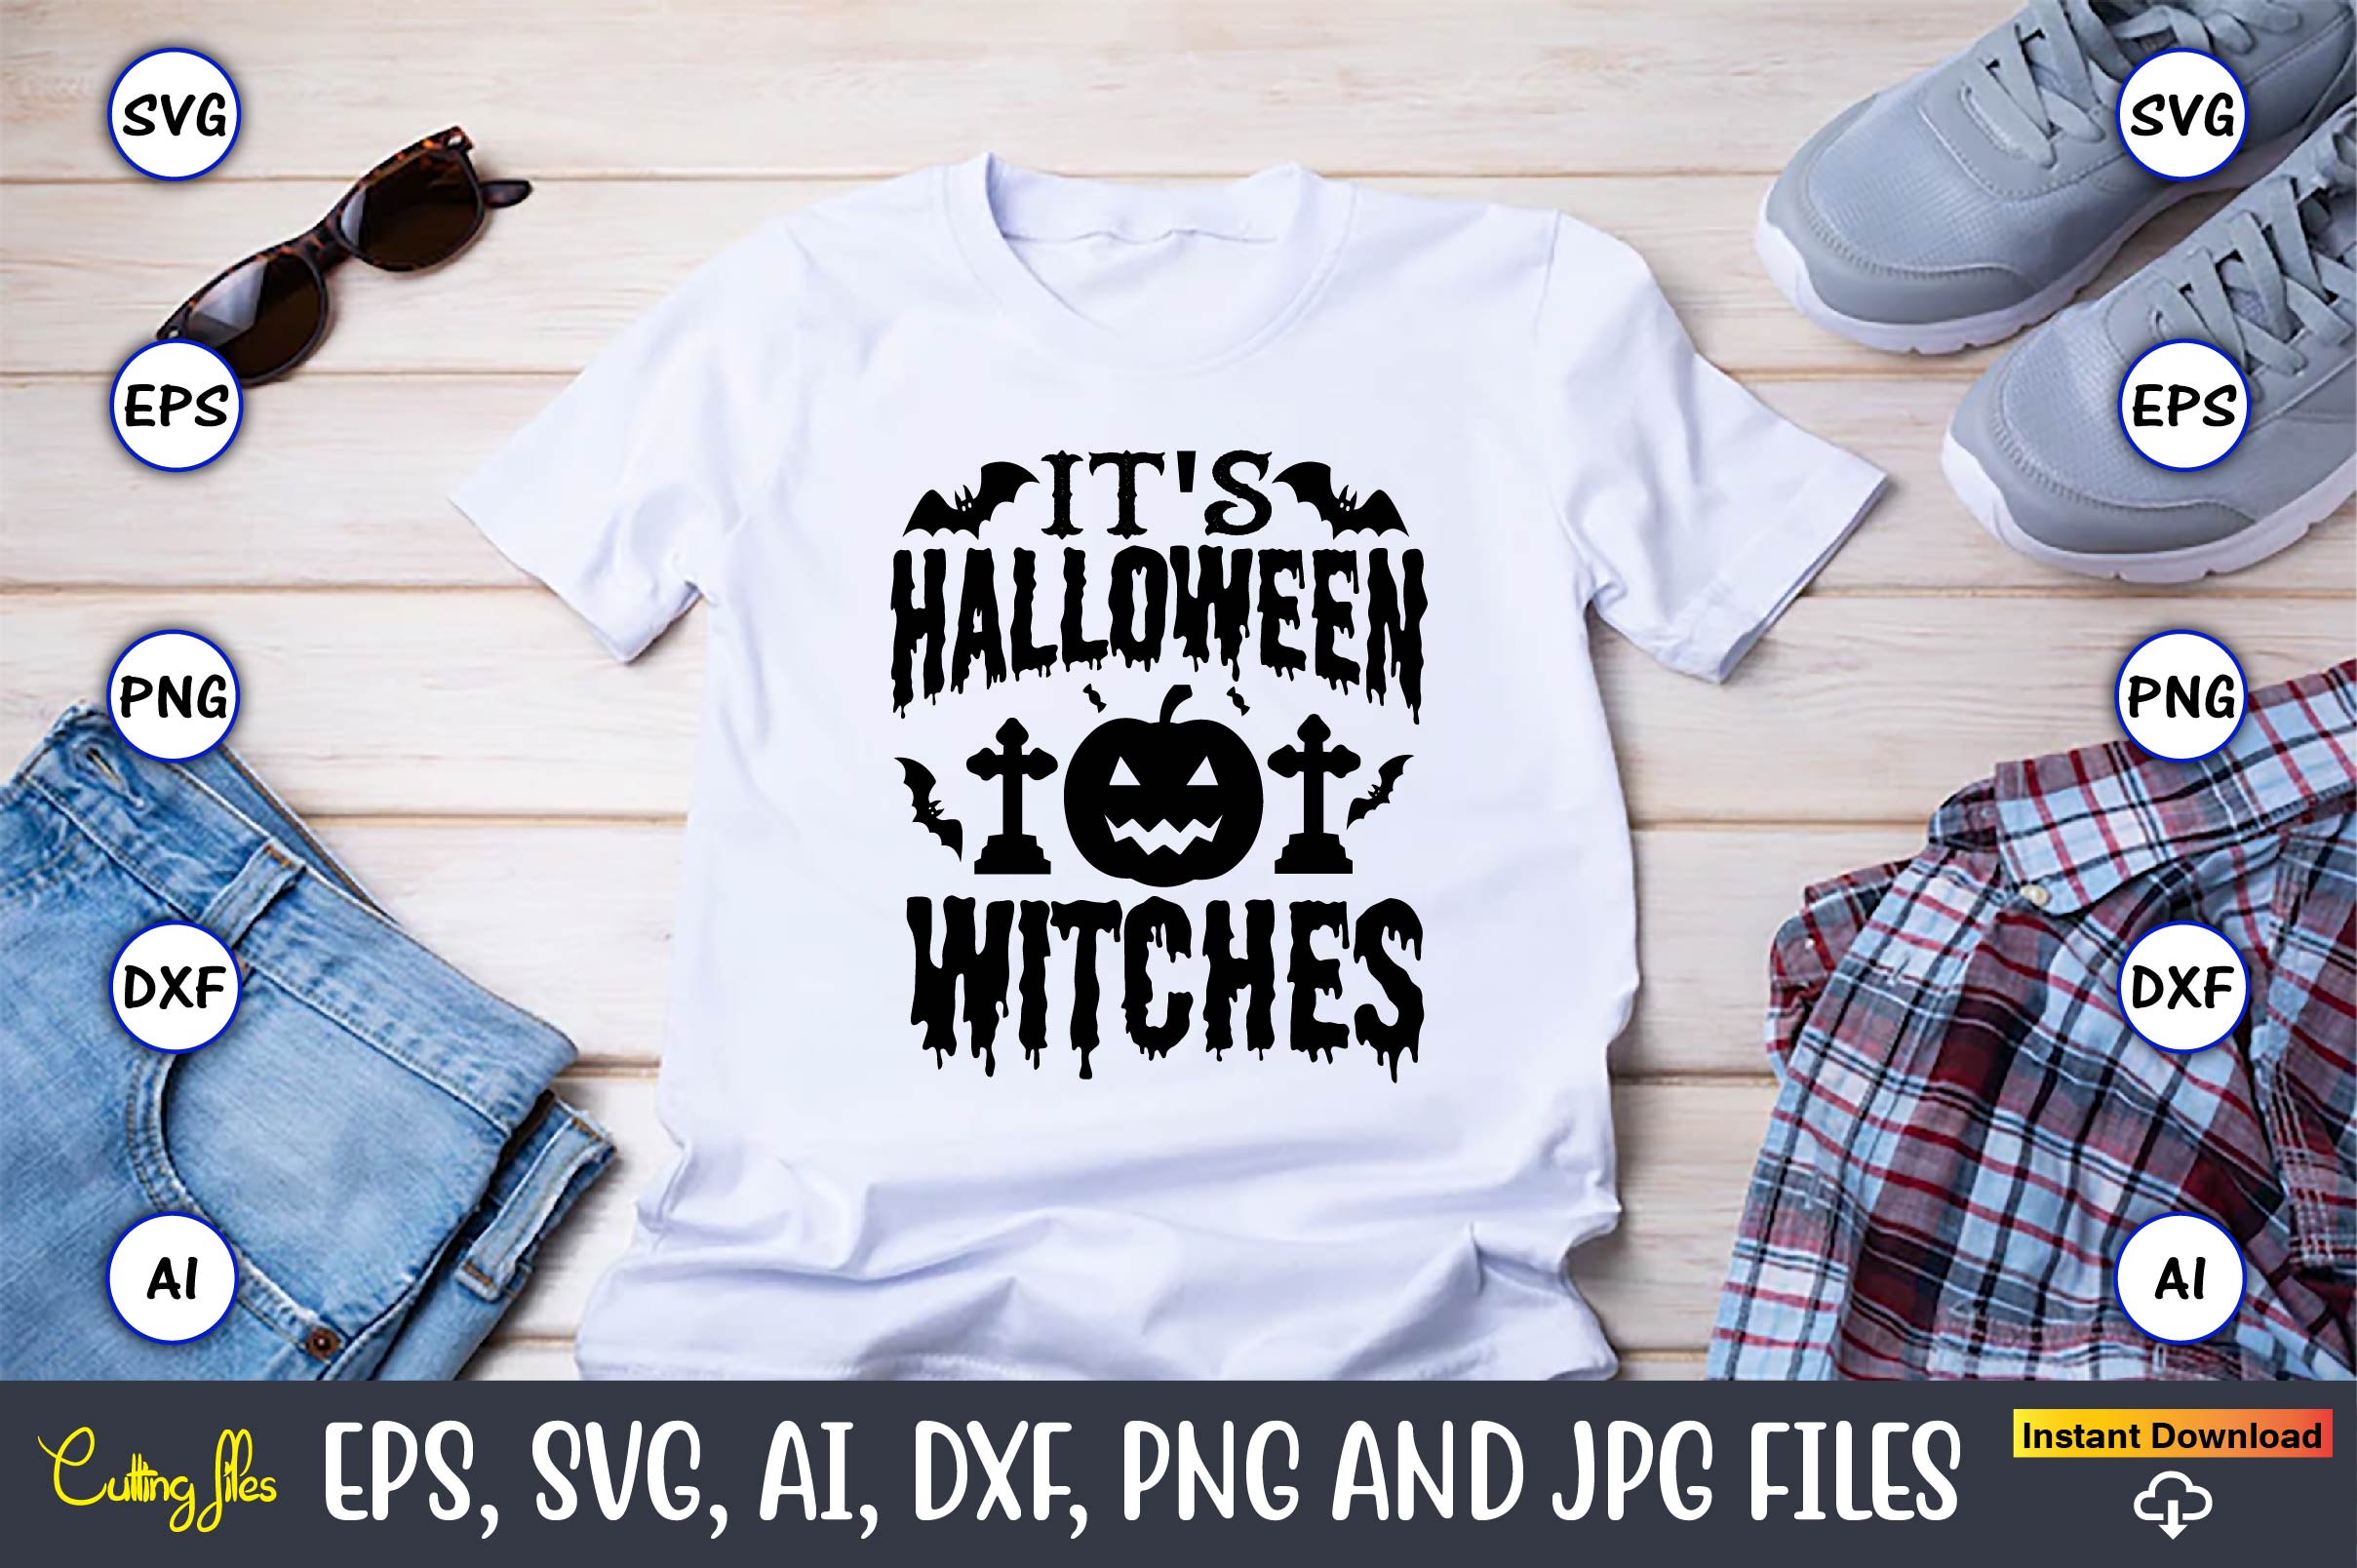 Image of a white t-shirt with amazing halloween themed print.